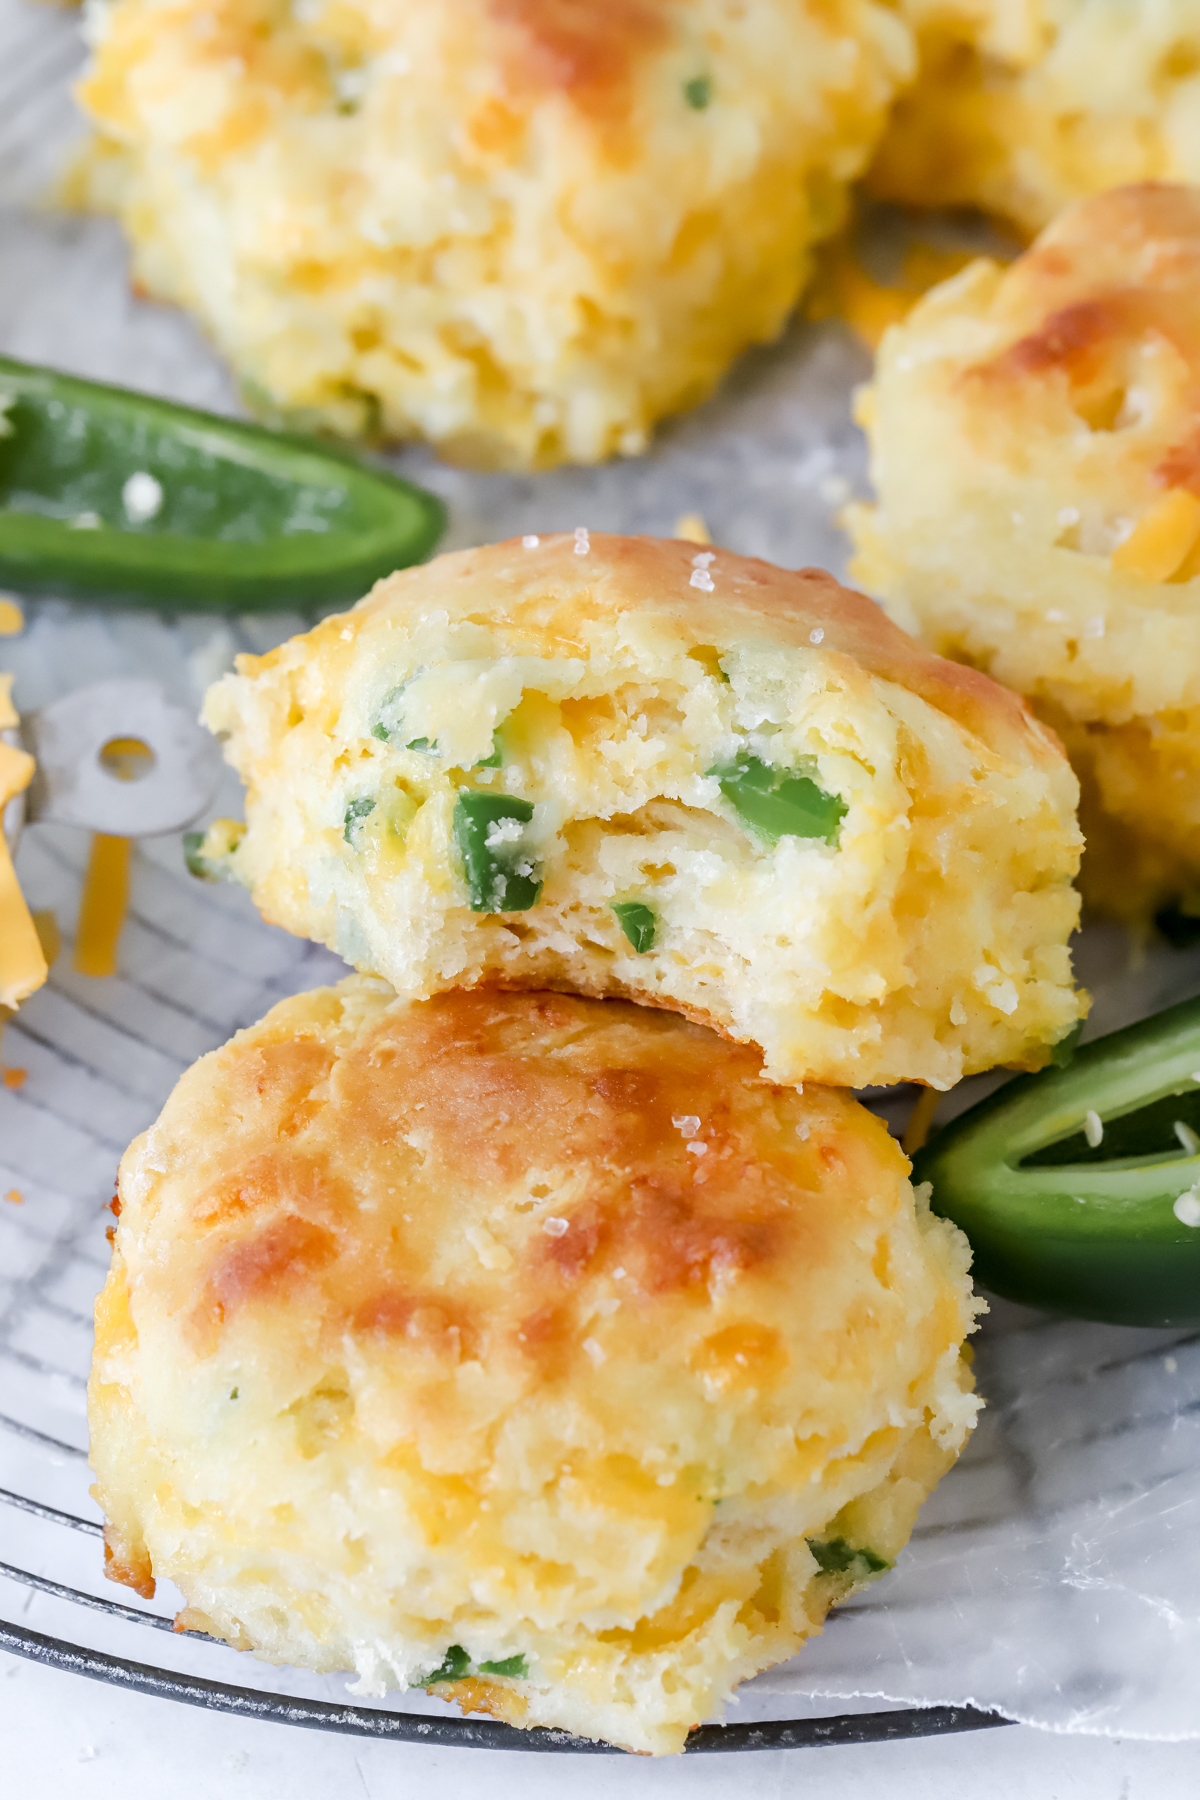 two cheddar jalapeno biscuits, one has a bite taken out of it